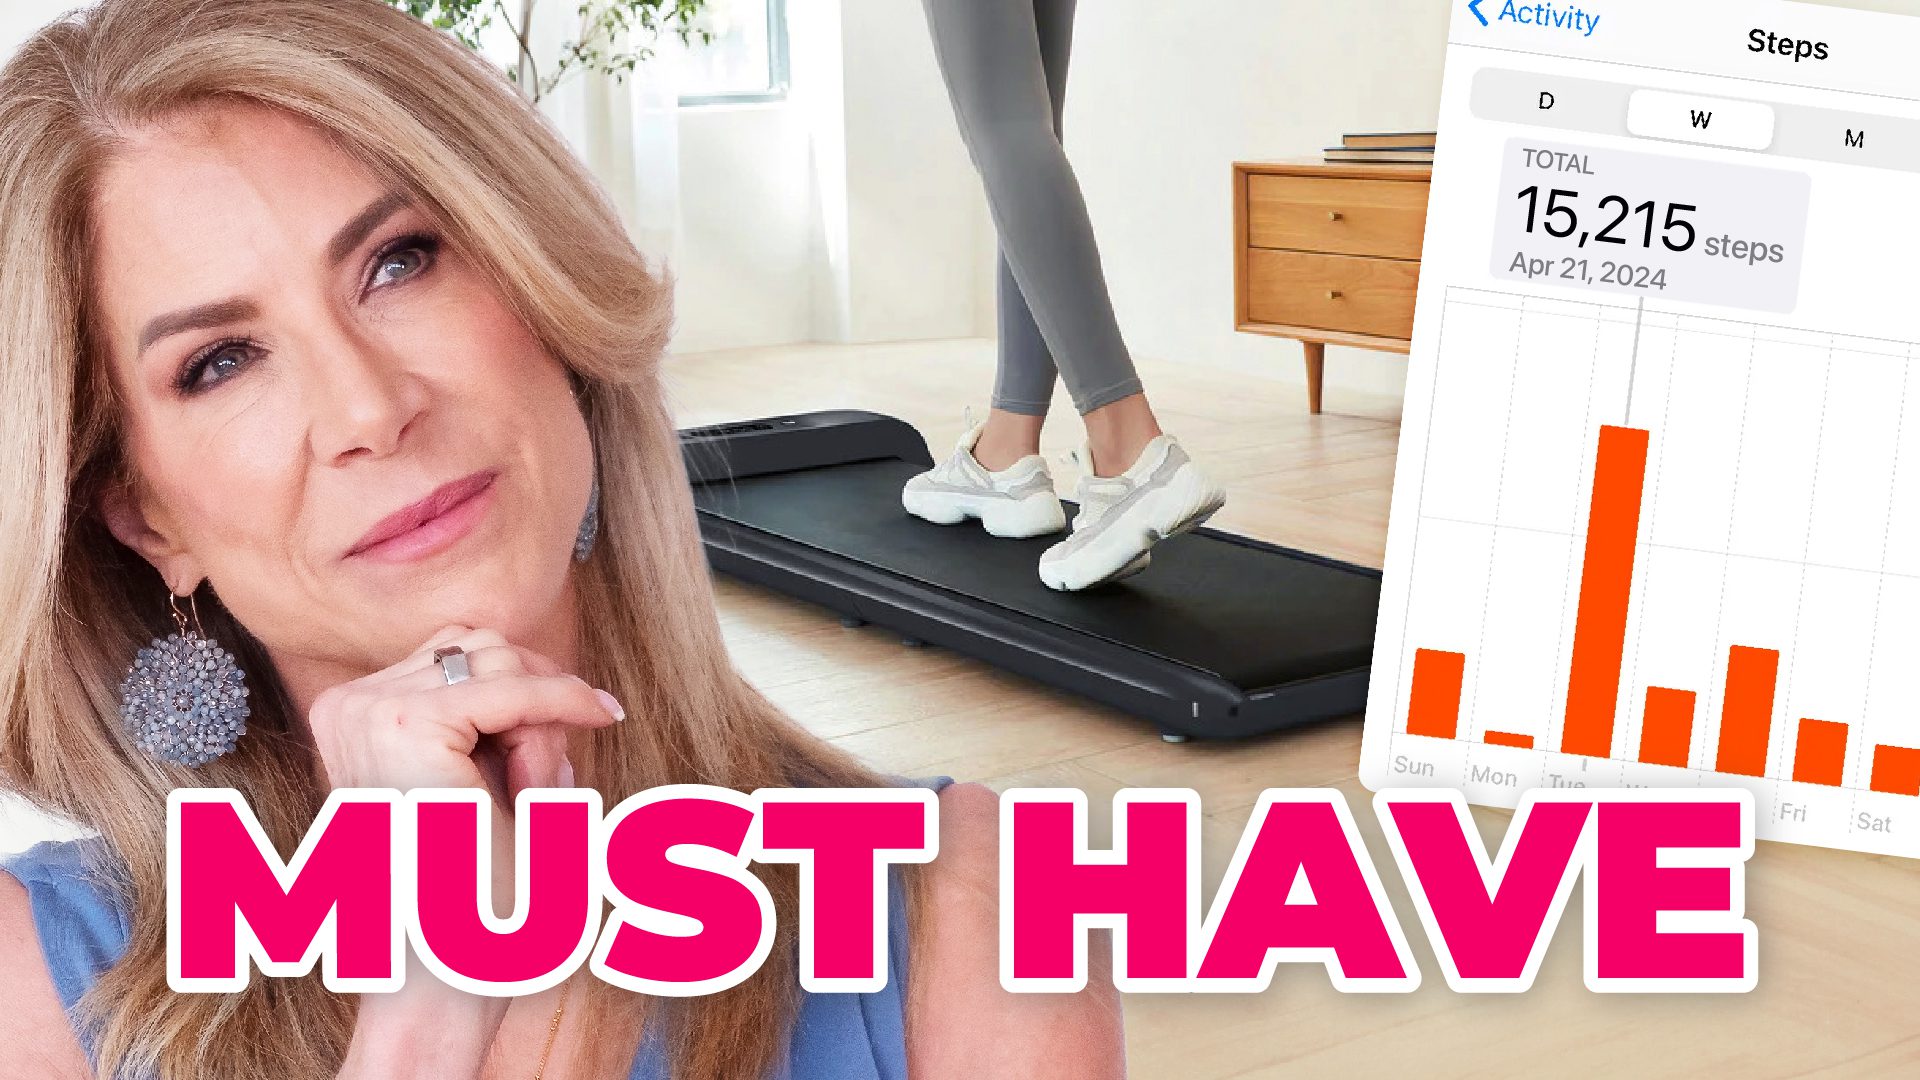 Lose Weight by WALKING! Walking Pads, Steps per Day, & More | Ep. 646